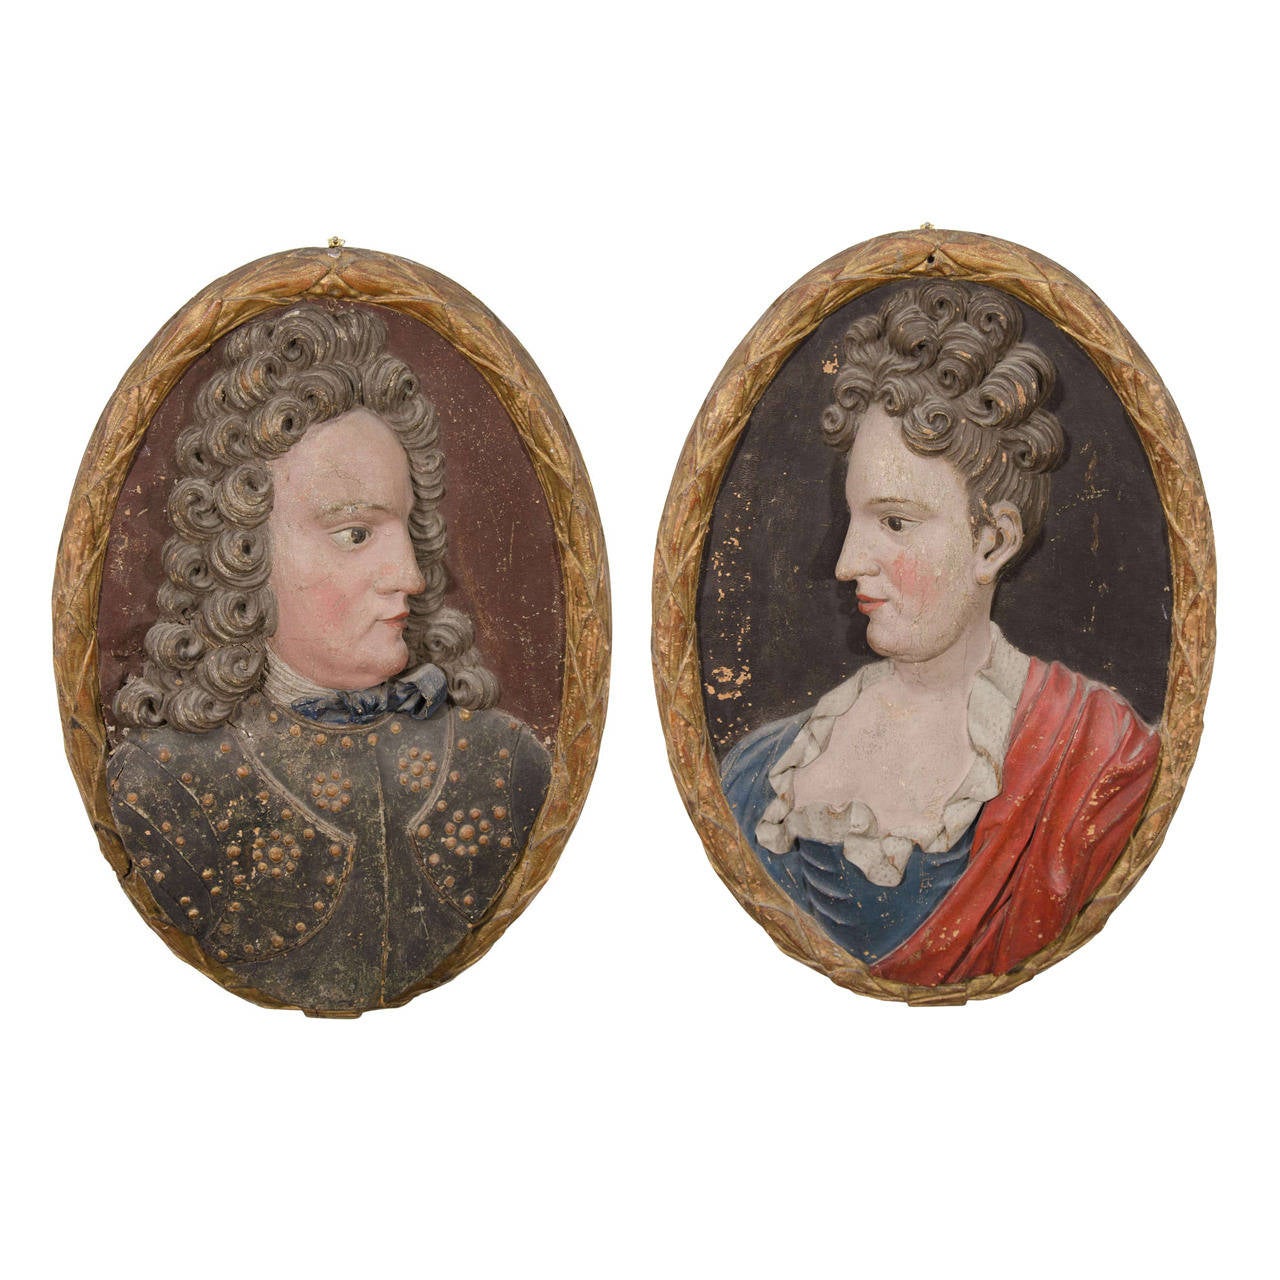 Set of 18th Century Carved Wood Plaques of a Man and Woman